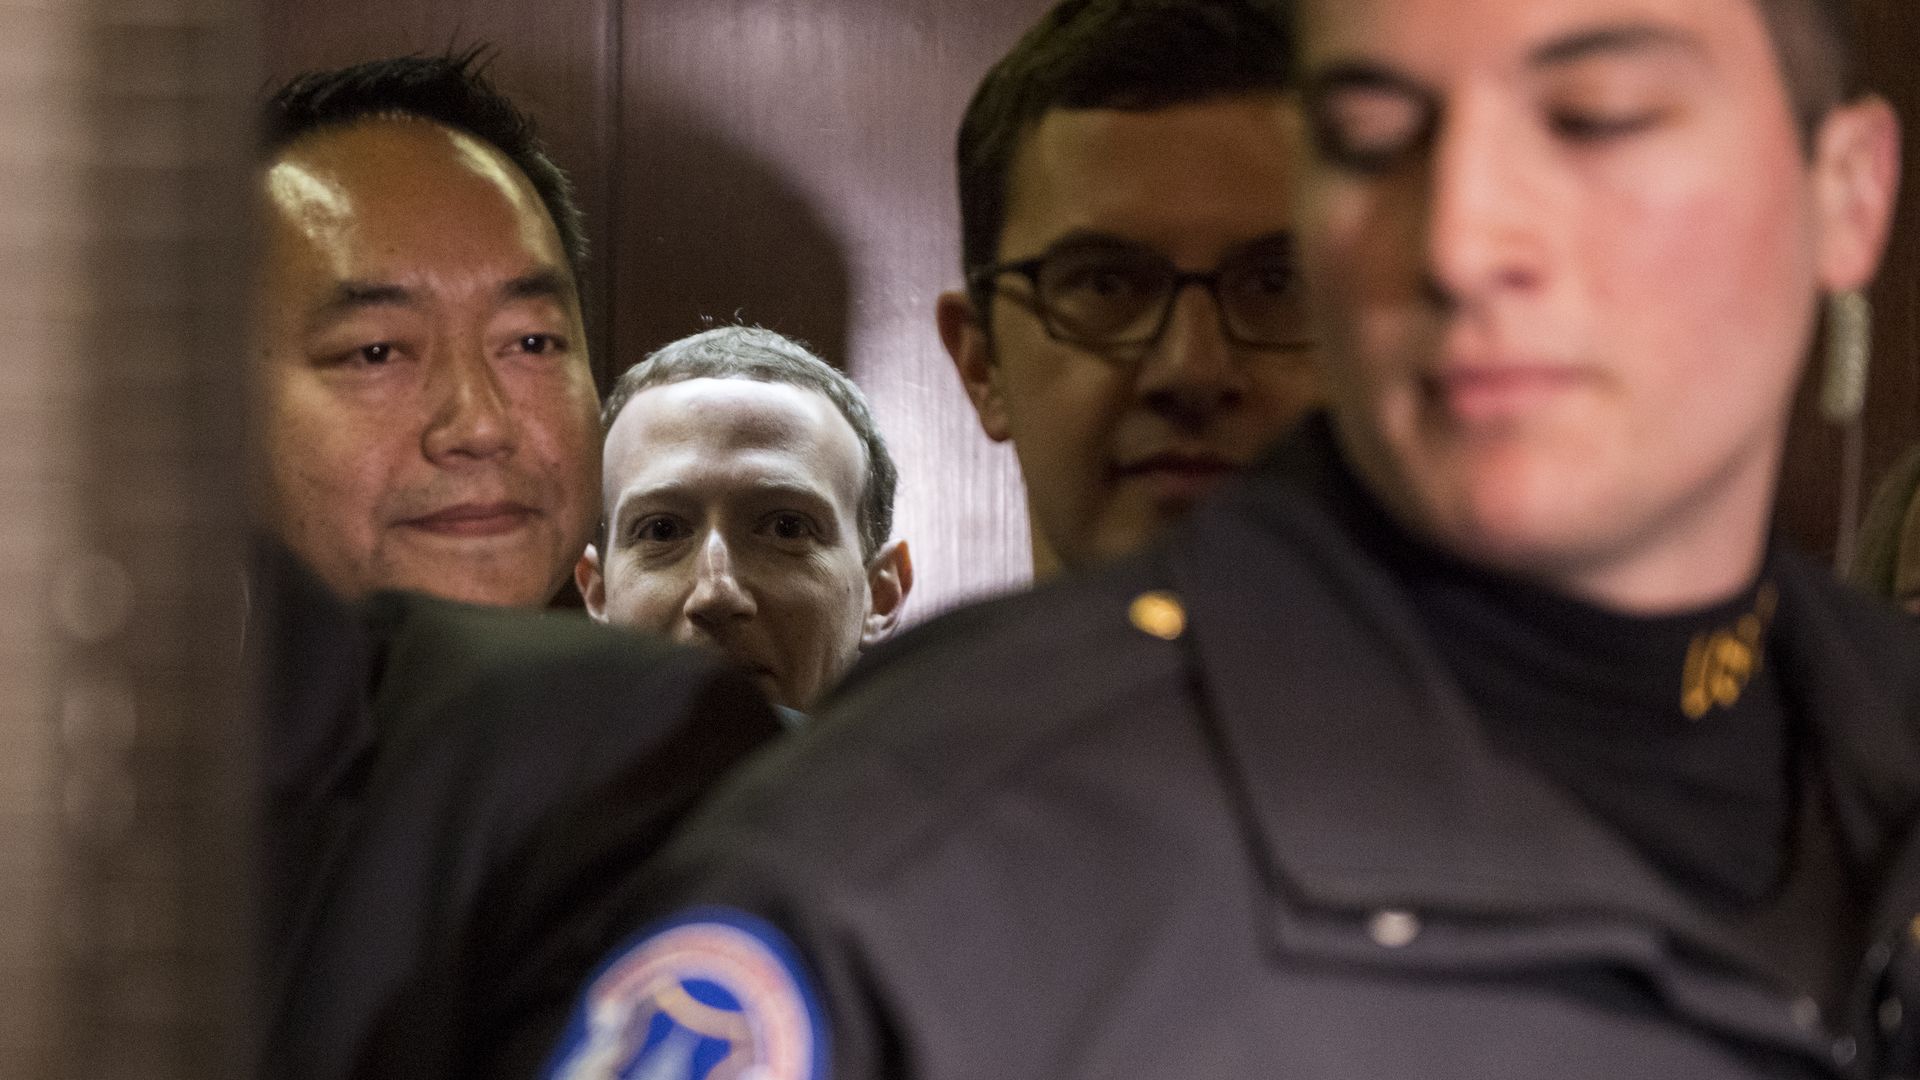 Mark Zuckerberg's face is half visible amid a group of other people